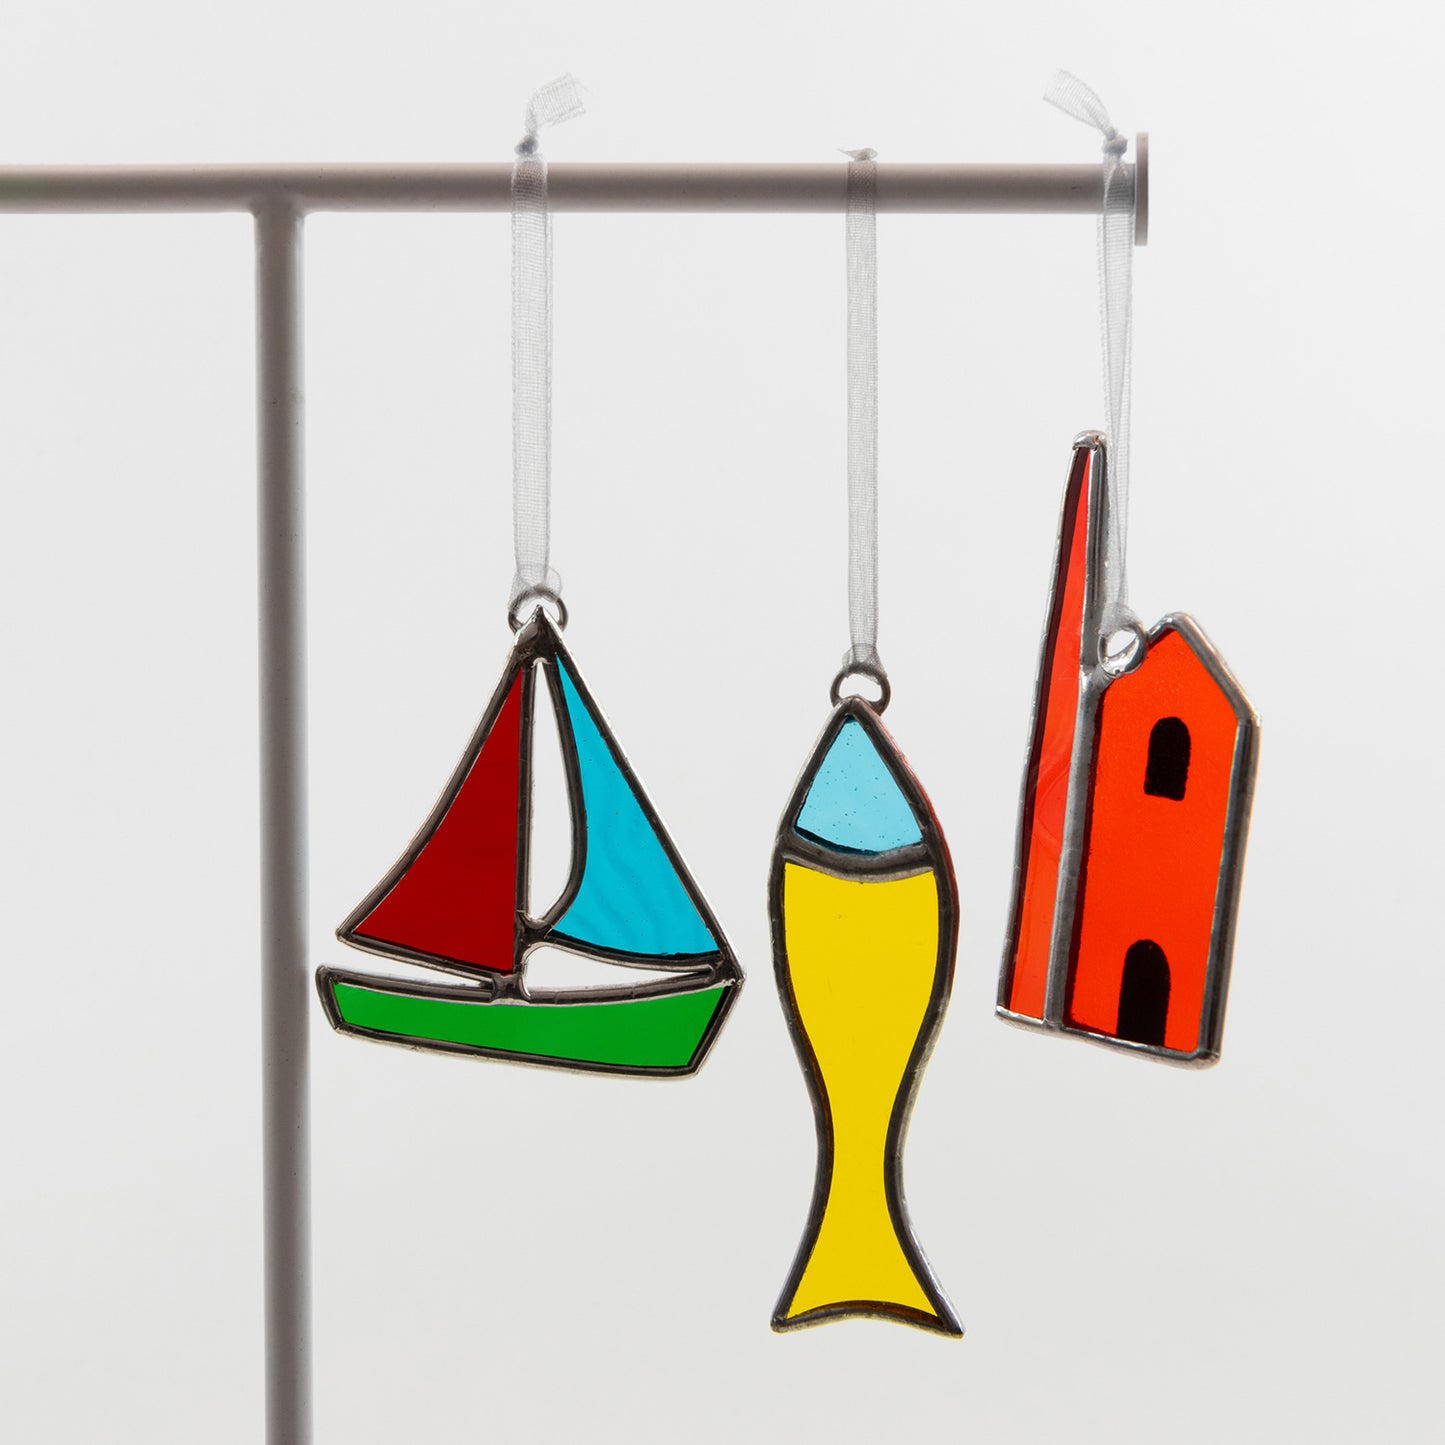 The glass engine house decoration hanging on a stand with the glass fish decoration and the glass sailboat decoration.